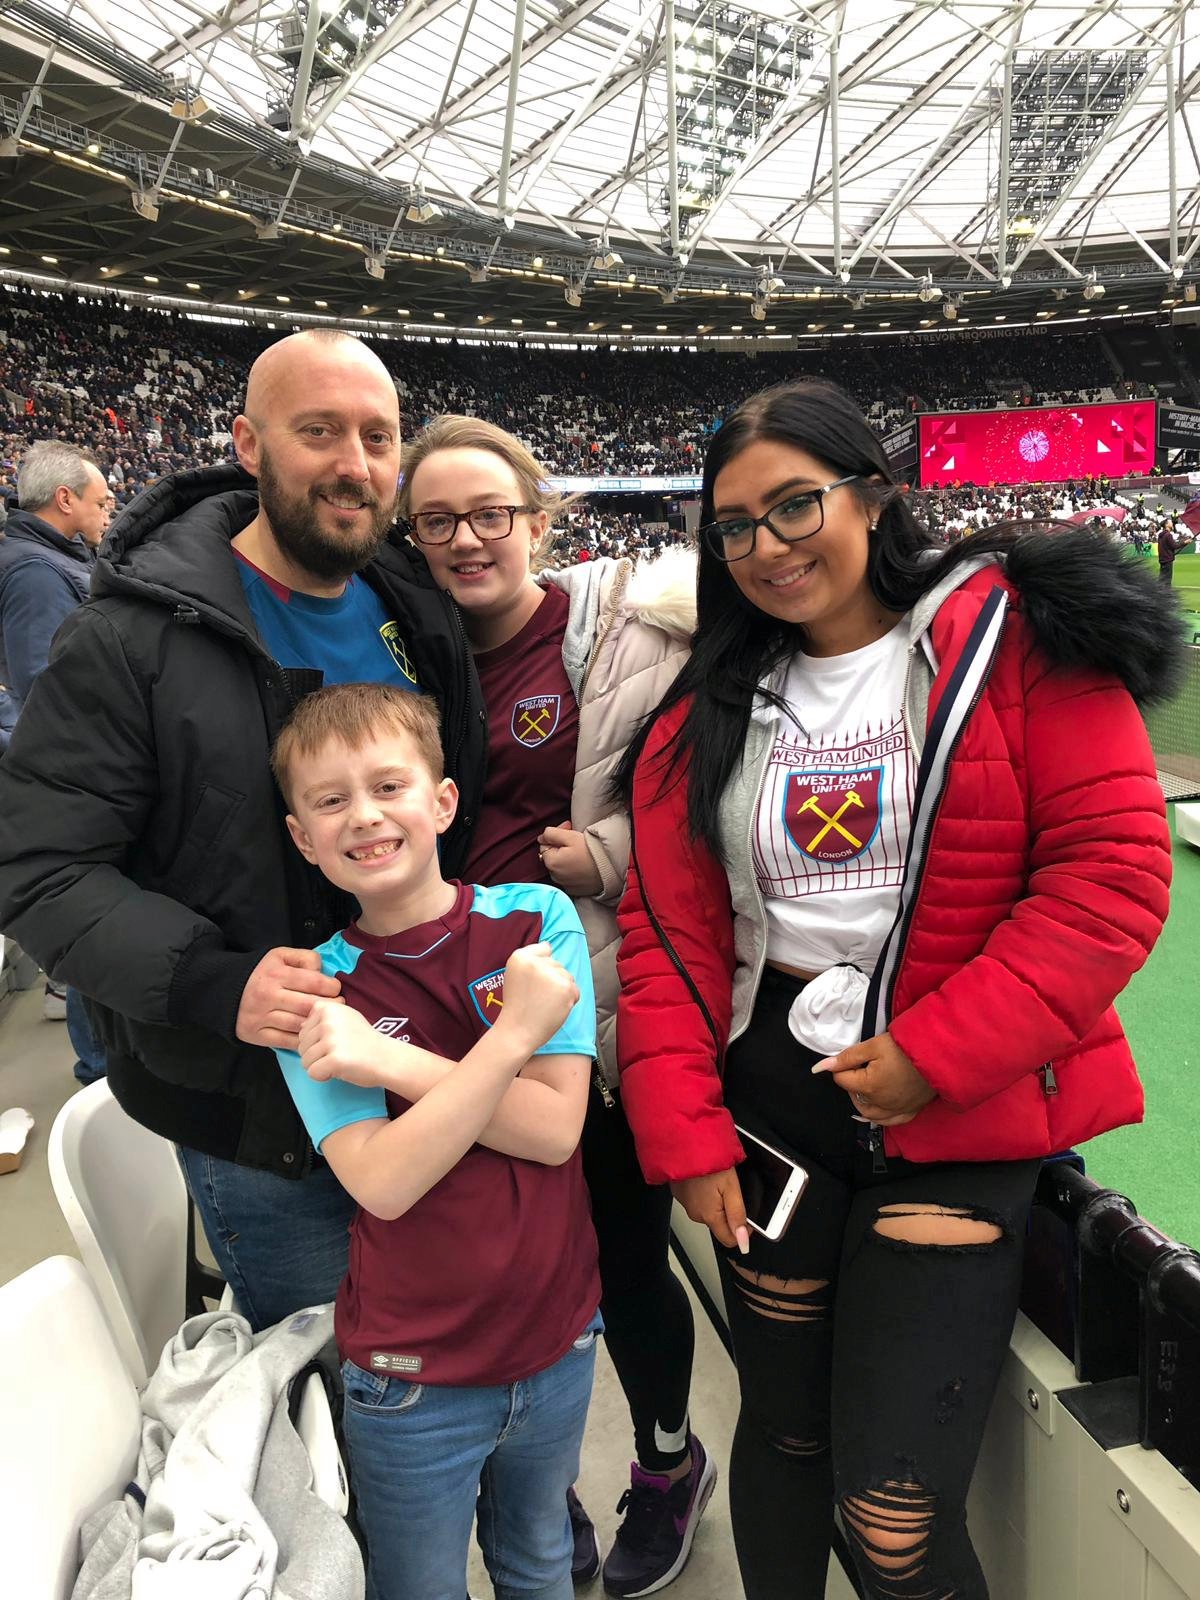 He recently took his family to West Ham as part of his aim to make the most of whatever time they have left